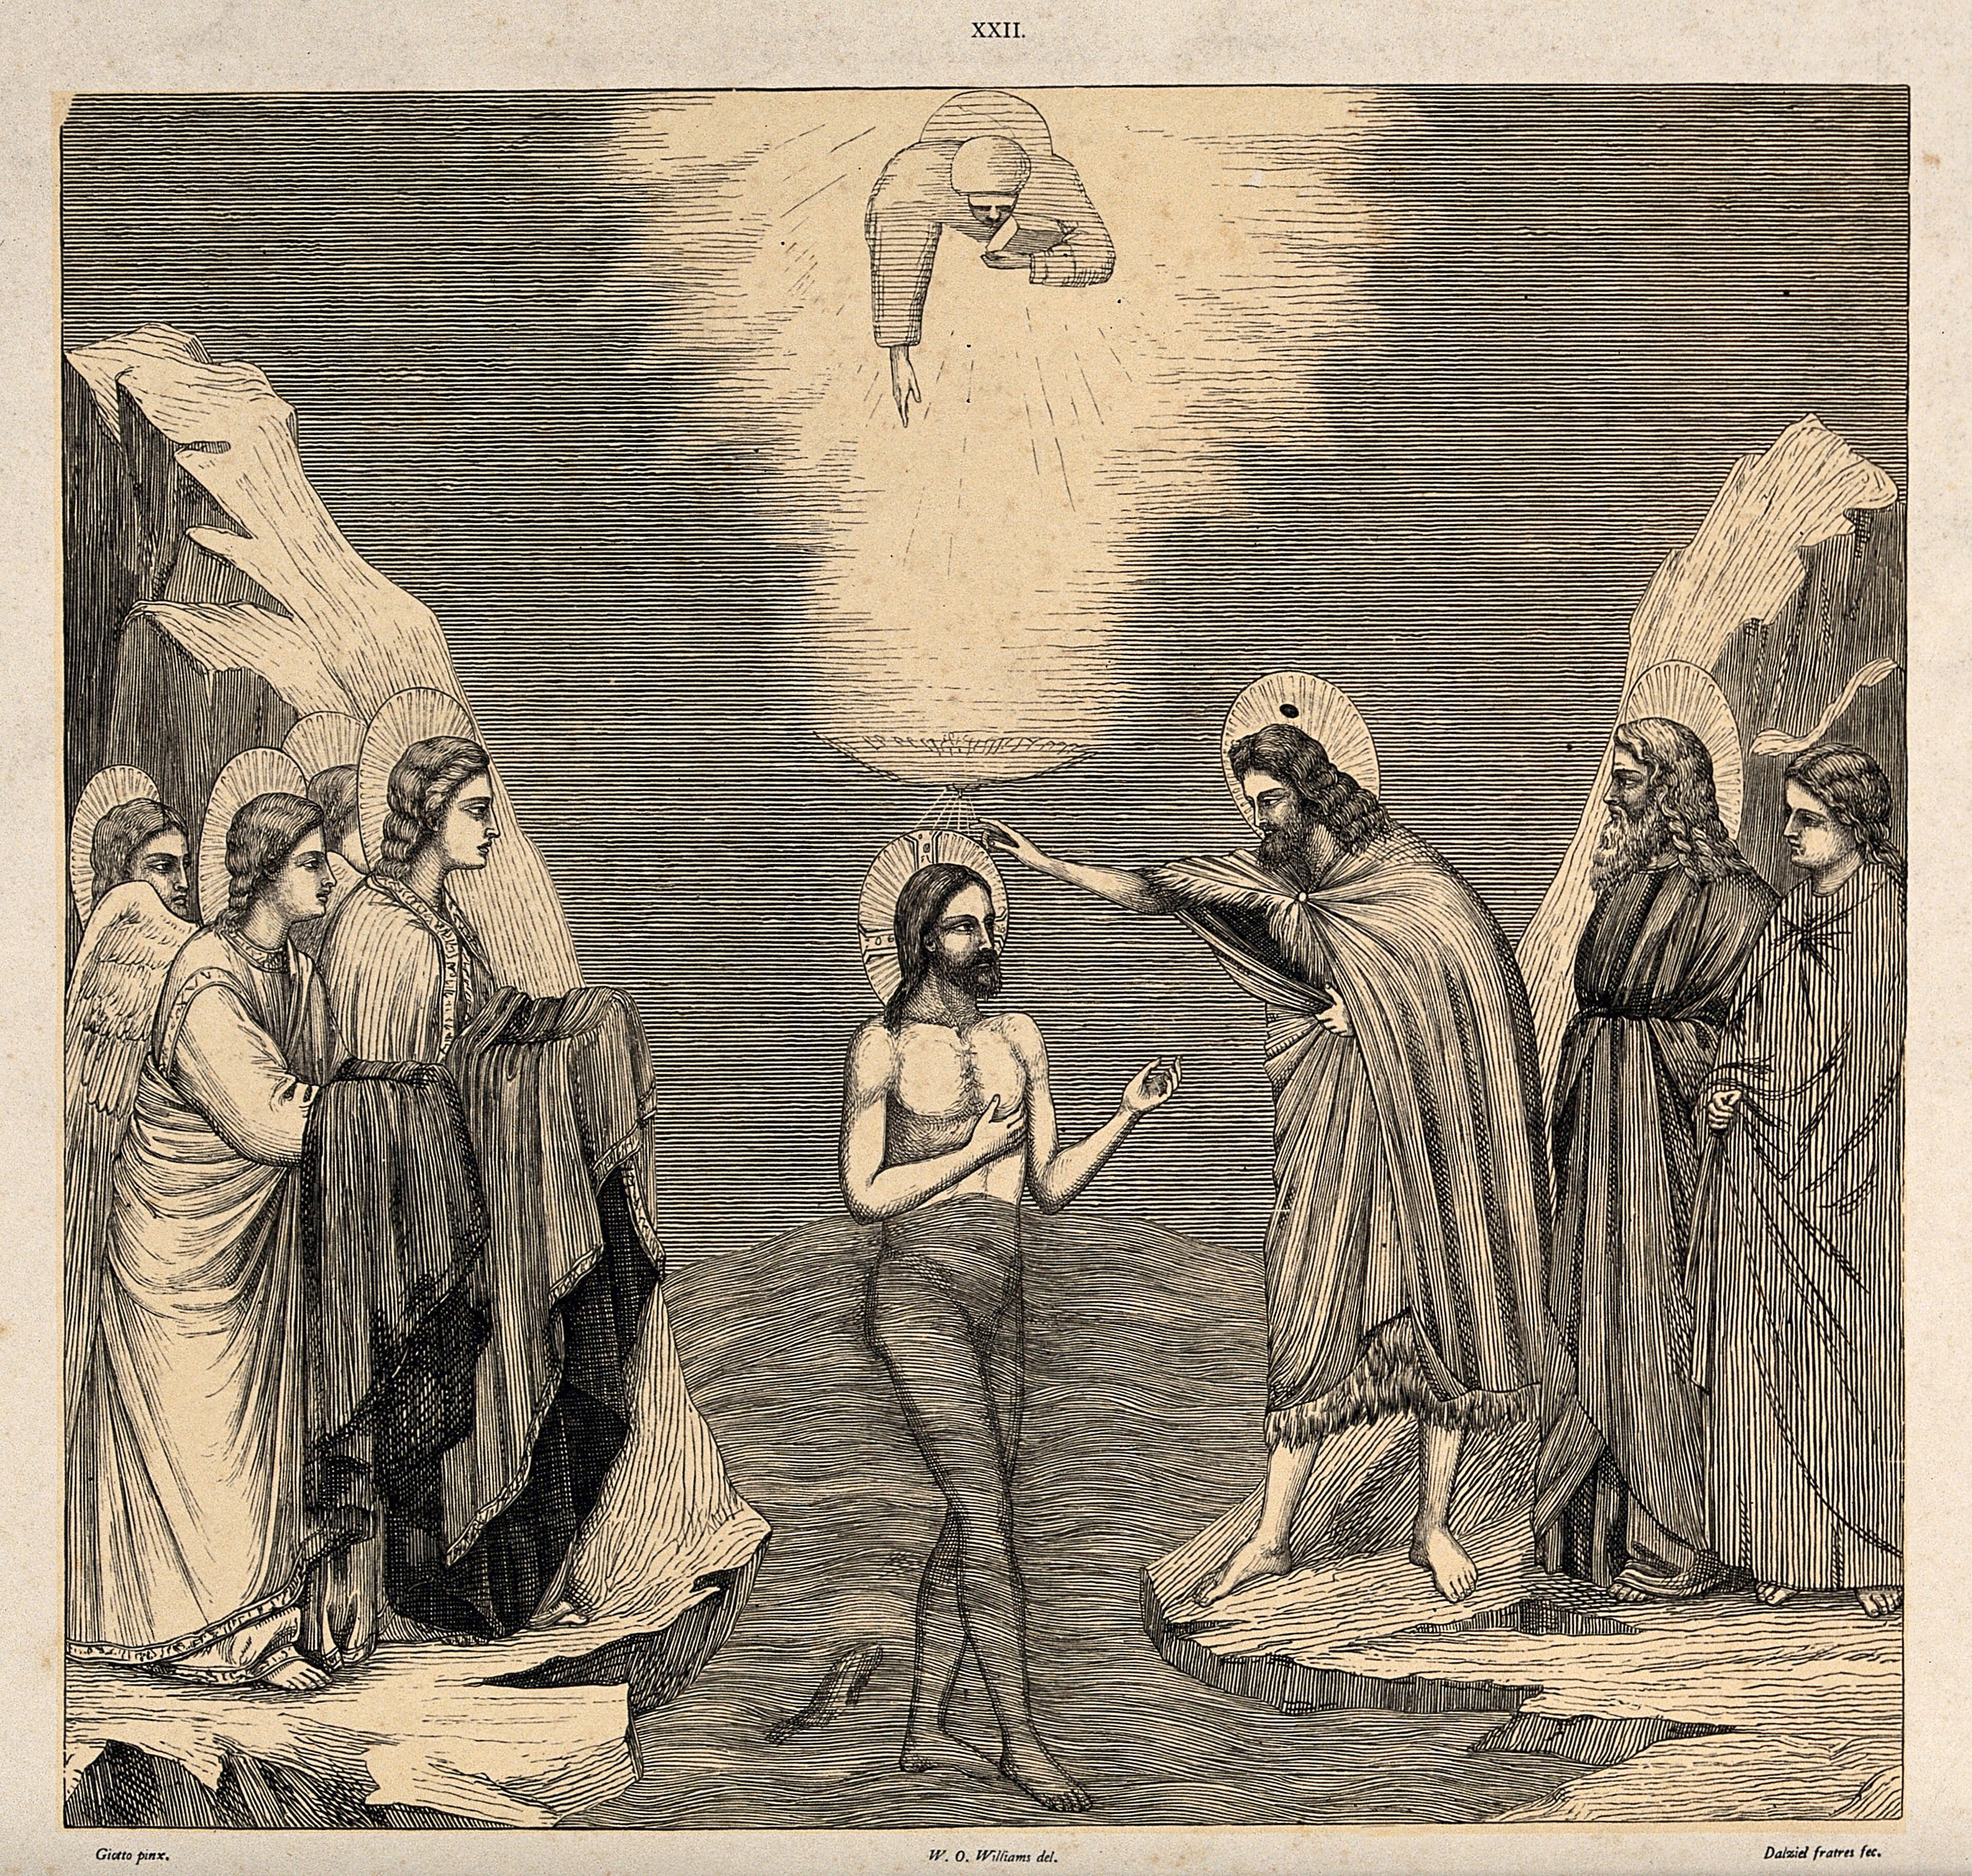 Saint John the Baptist baptises Christ; an angel with a book descends from above. Wood engraving by the Dalziel brothers, 1854, after W.O. Williams after Giotto.